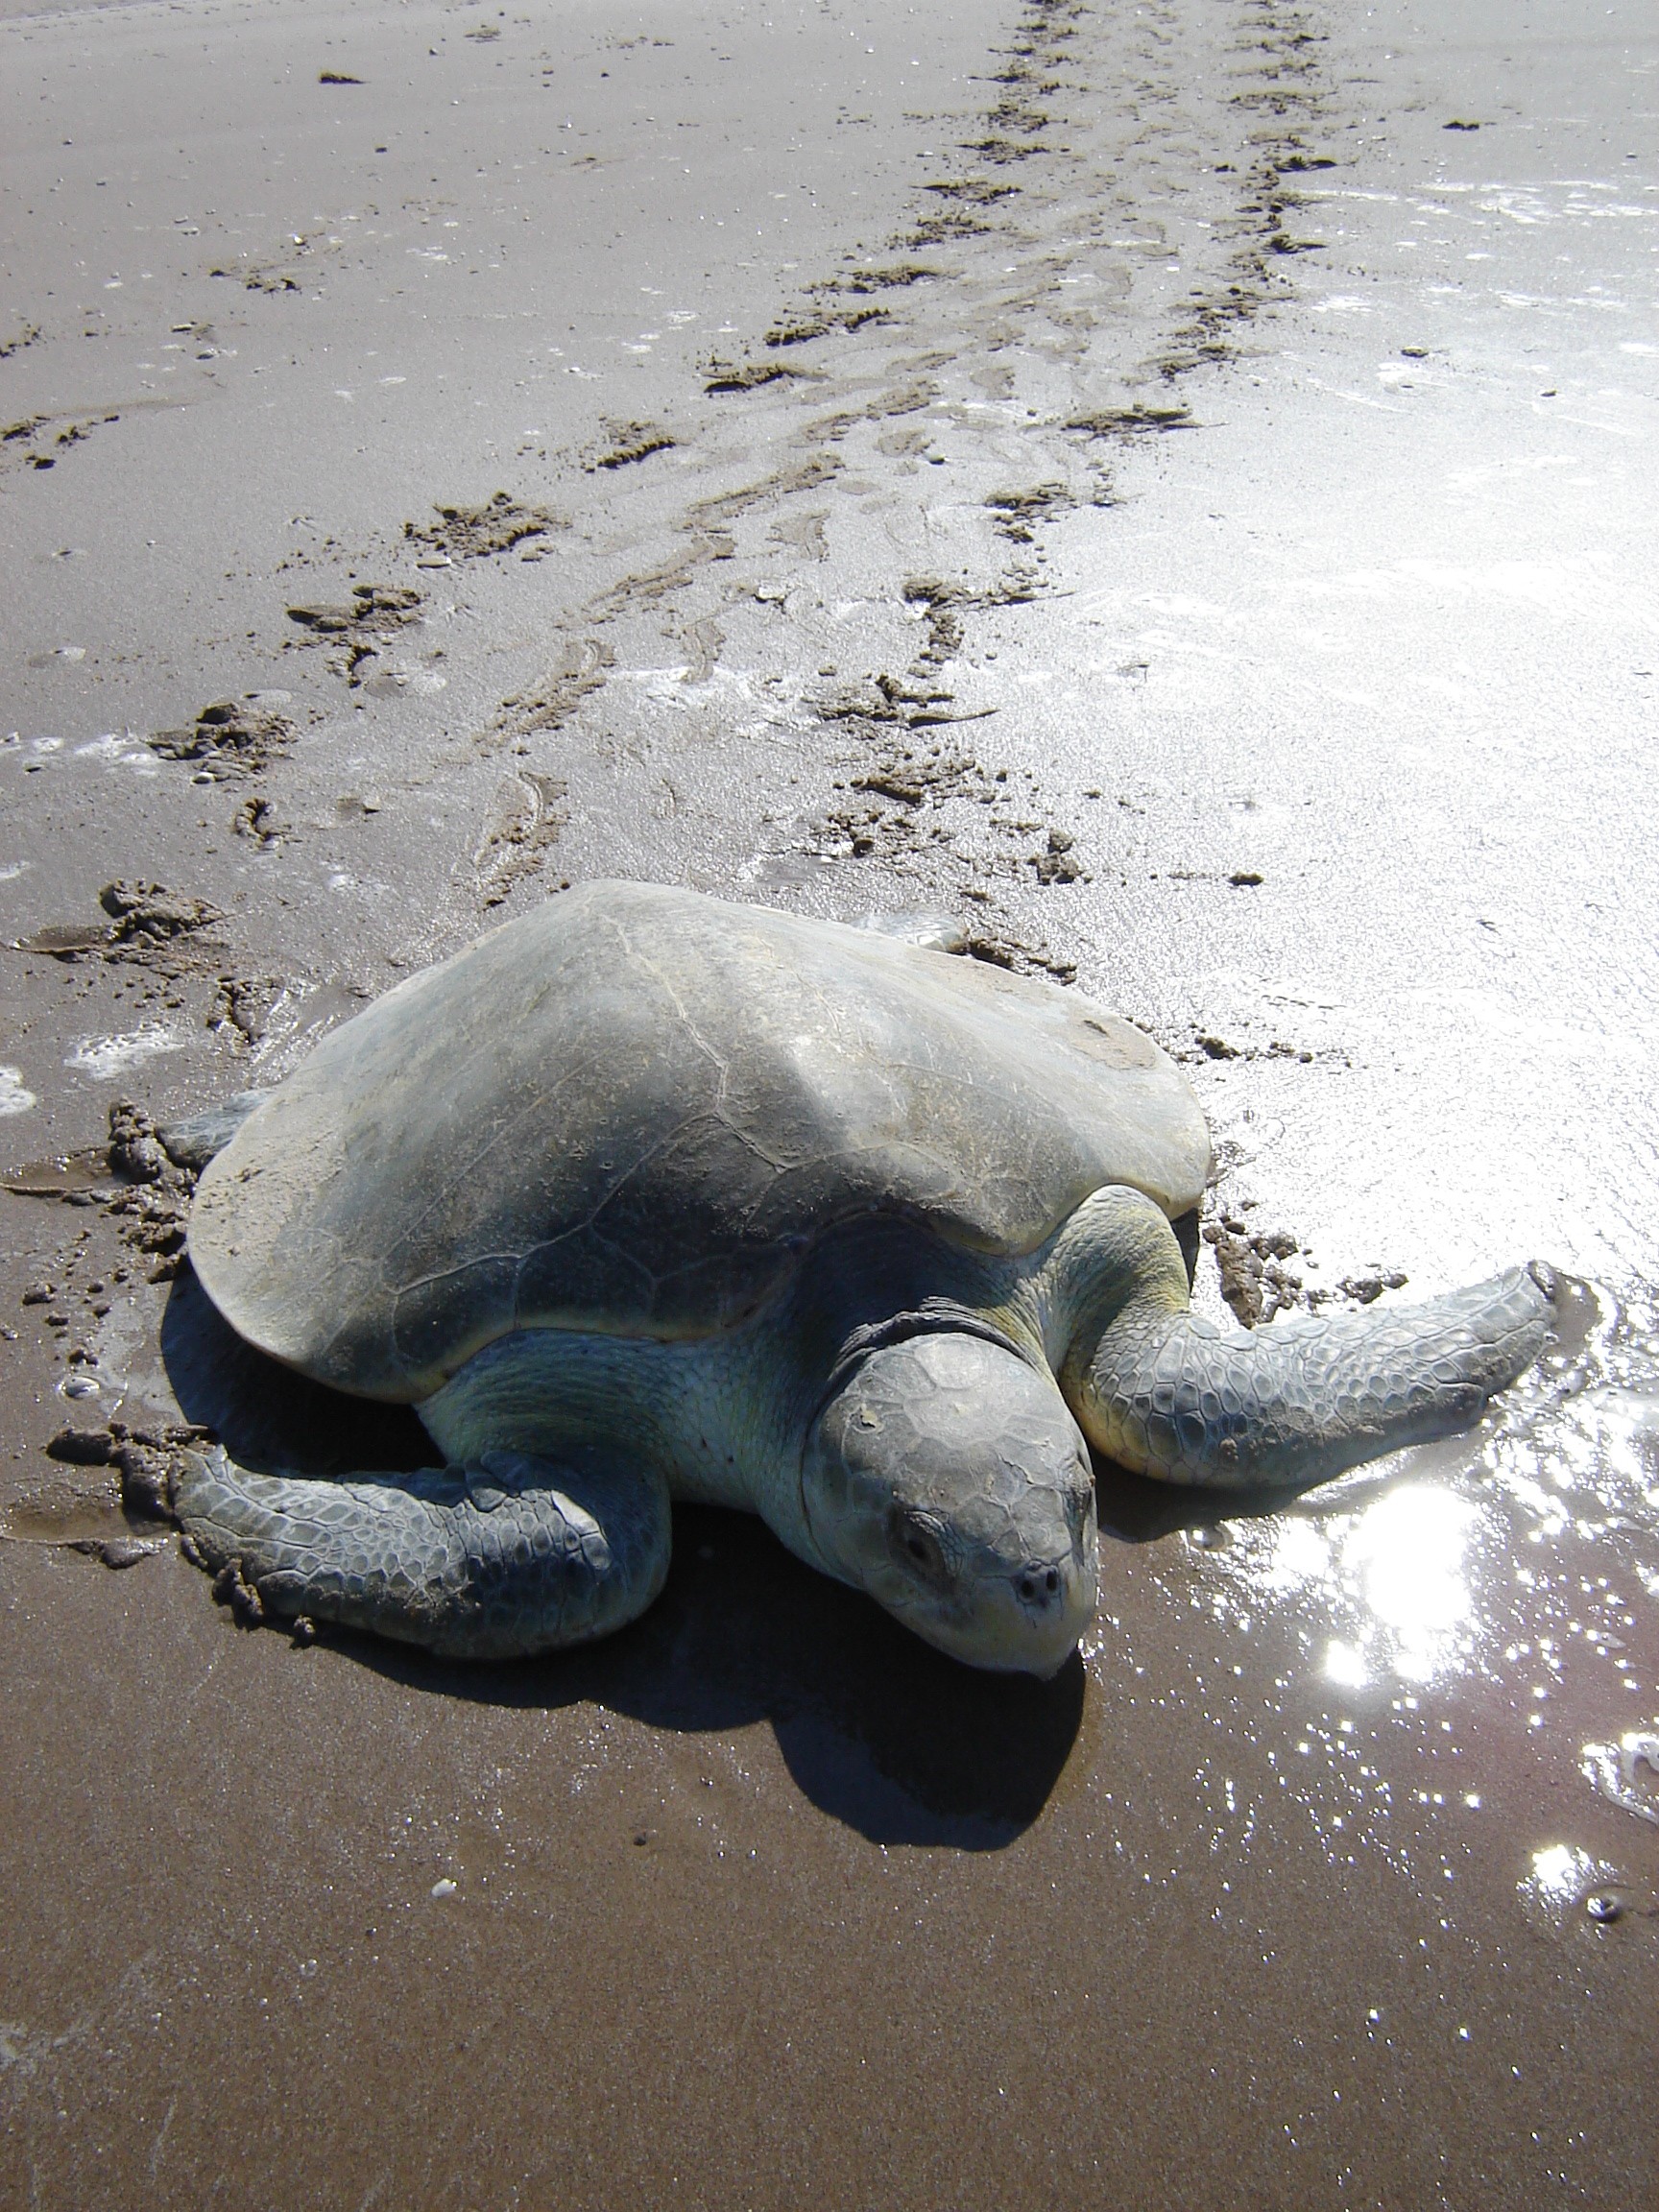  A Kemp’s ridley returns to sea after nesting. © NPS Photo 